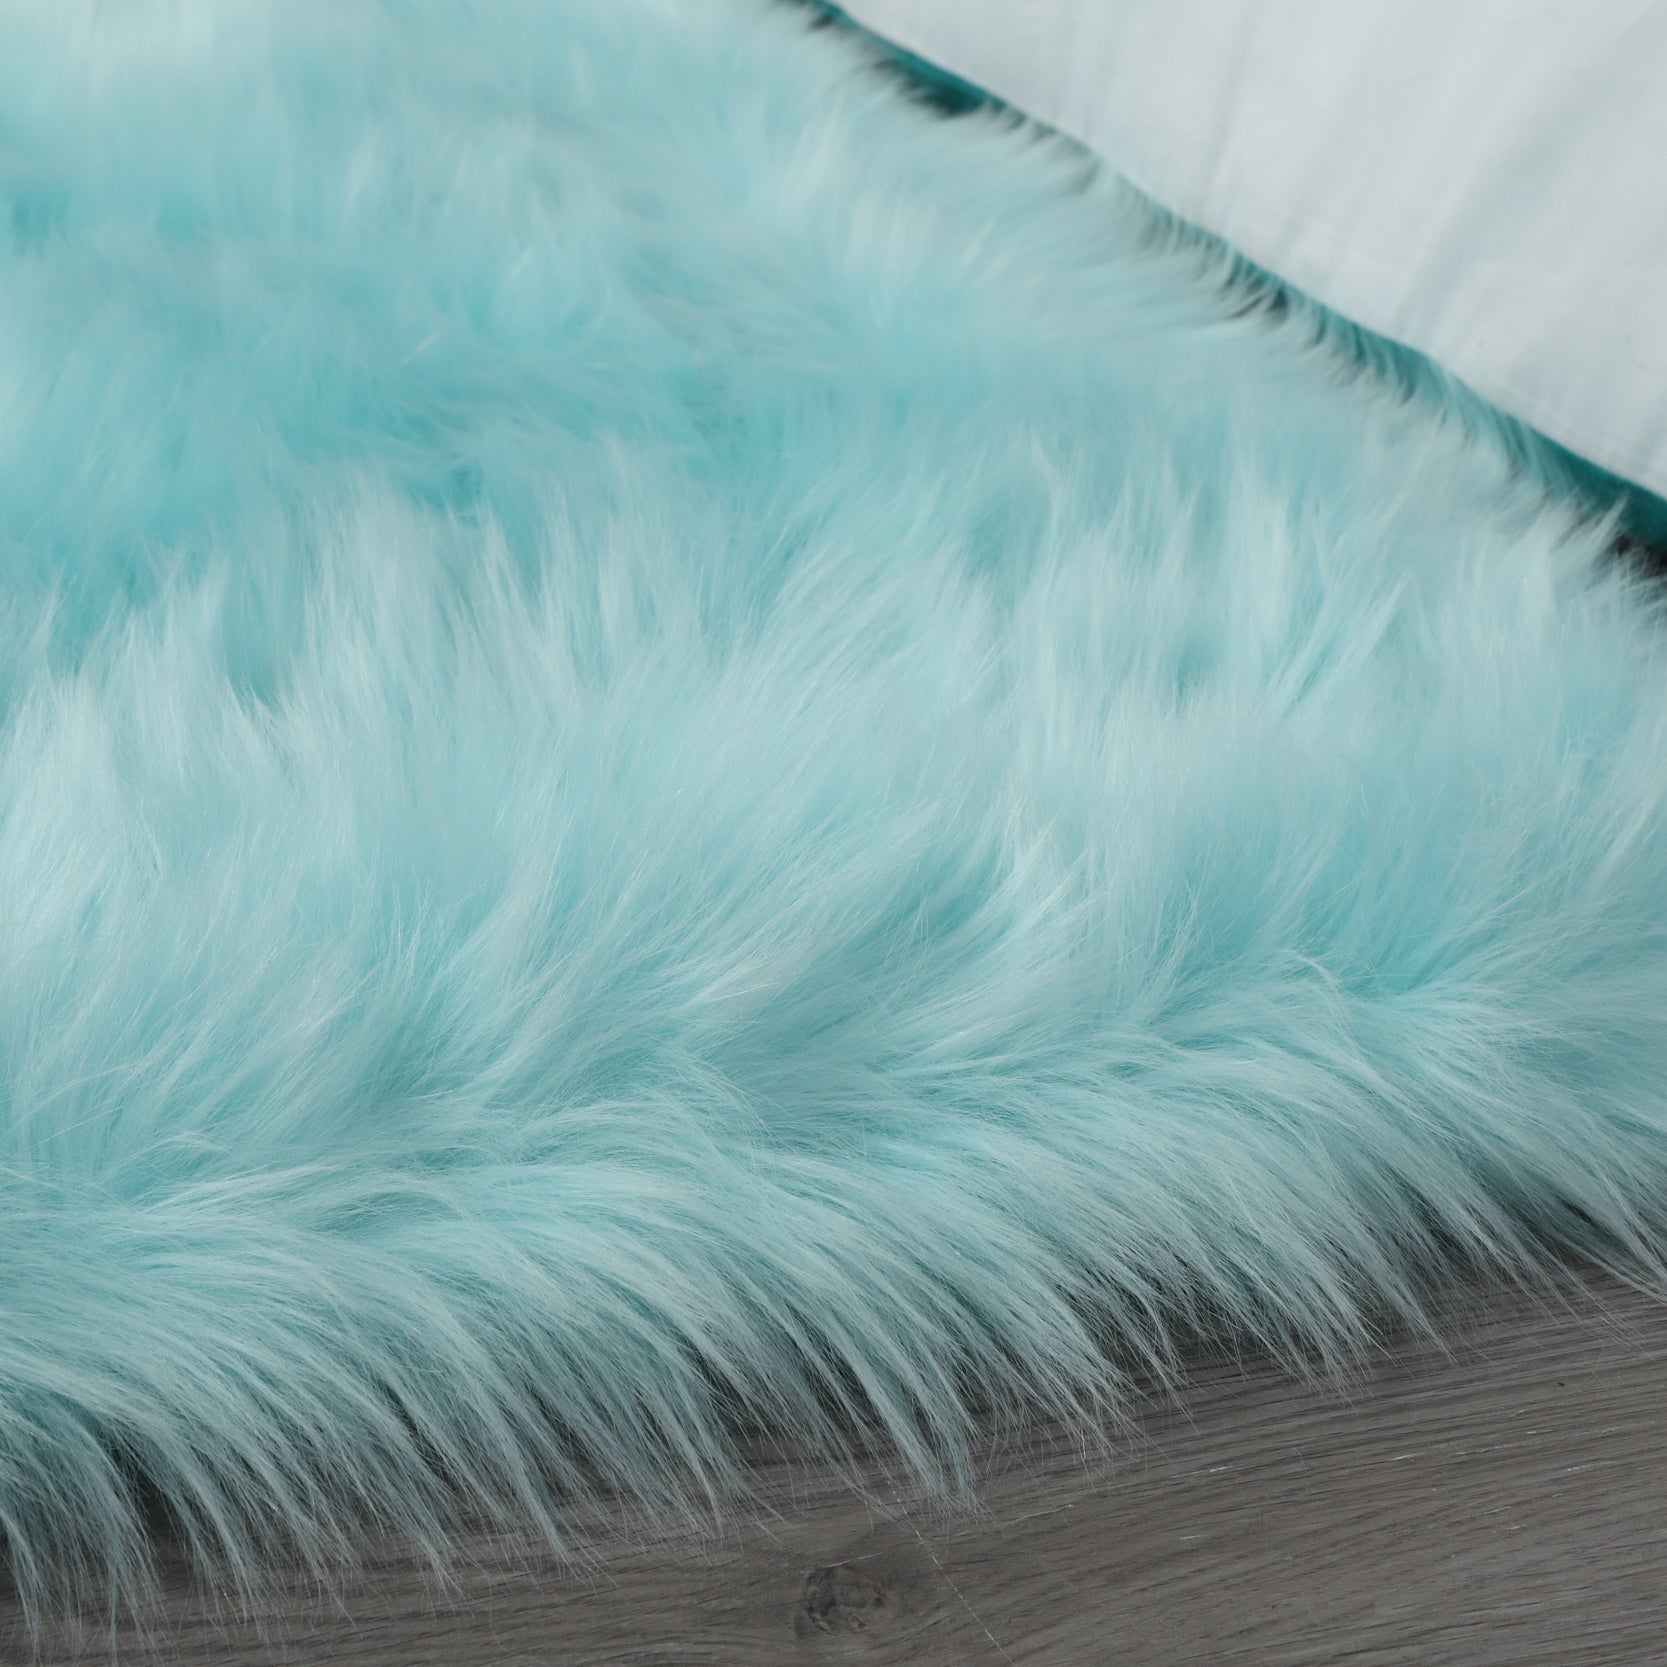 7' x 5' Cozy Collection Ultra Soft Fluffy Faux Fur Sheepskin Area Rug (Teal)